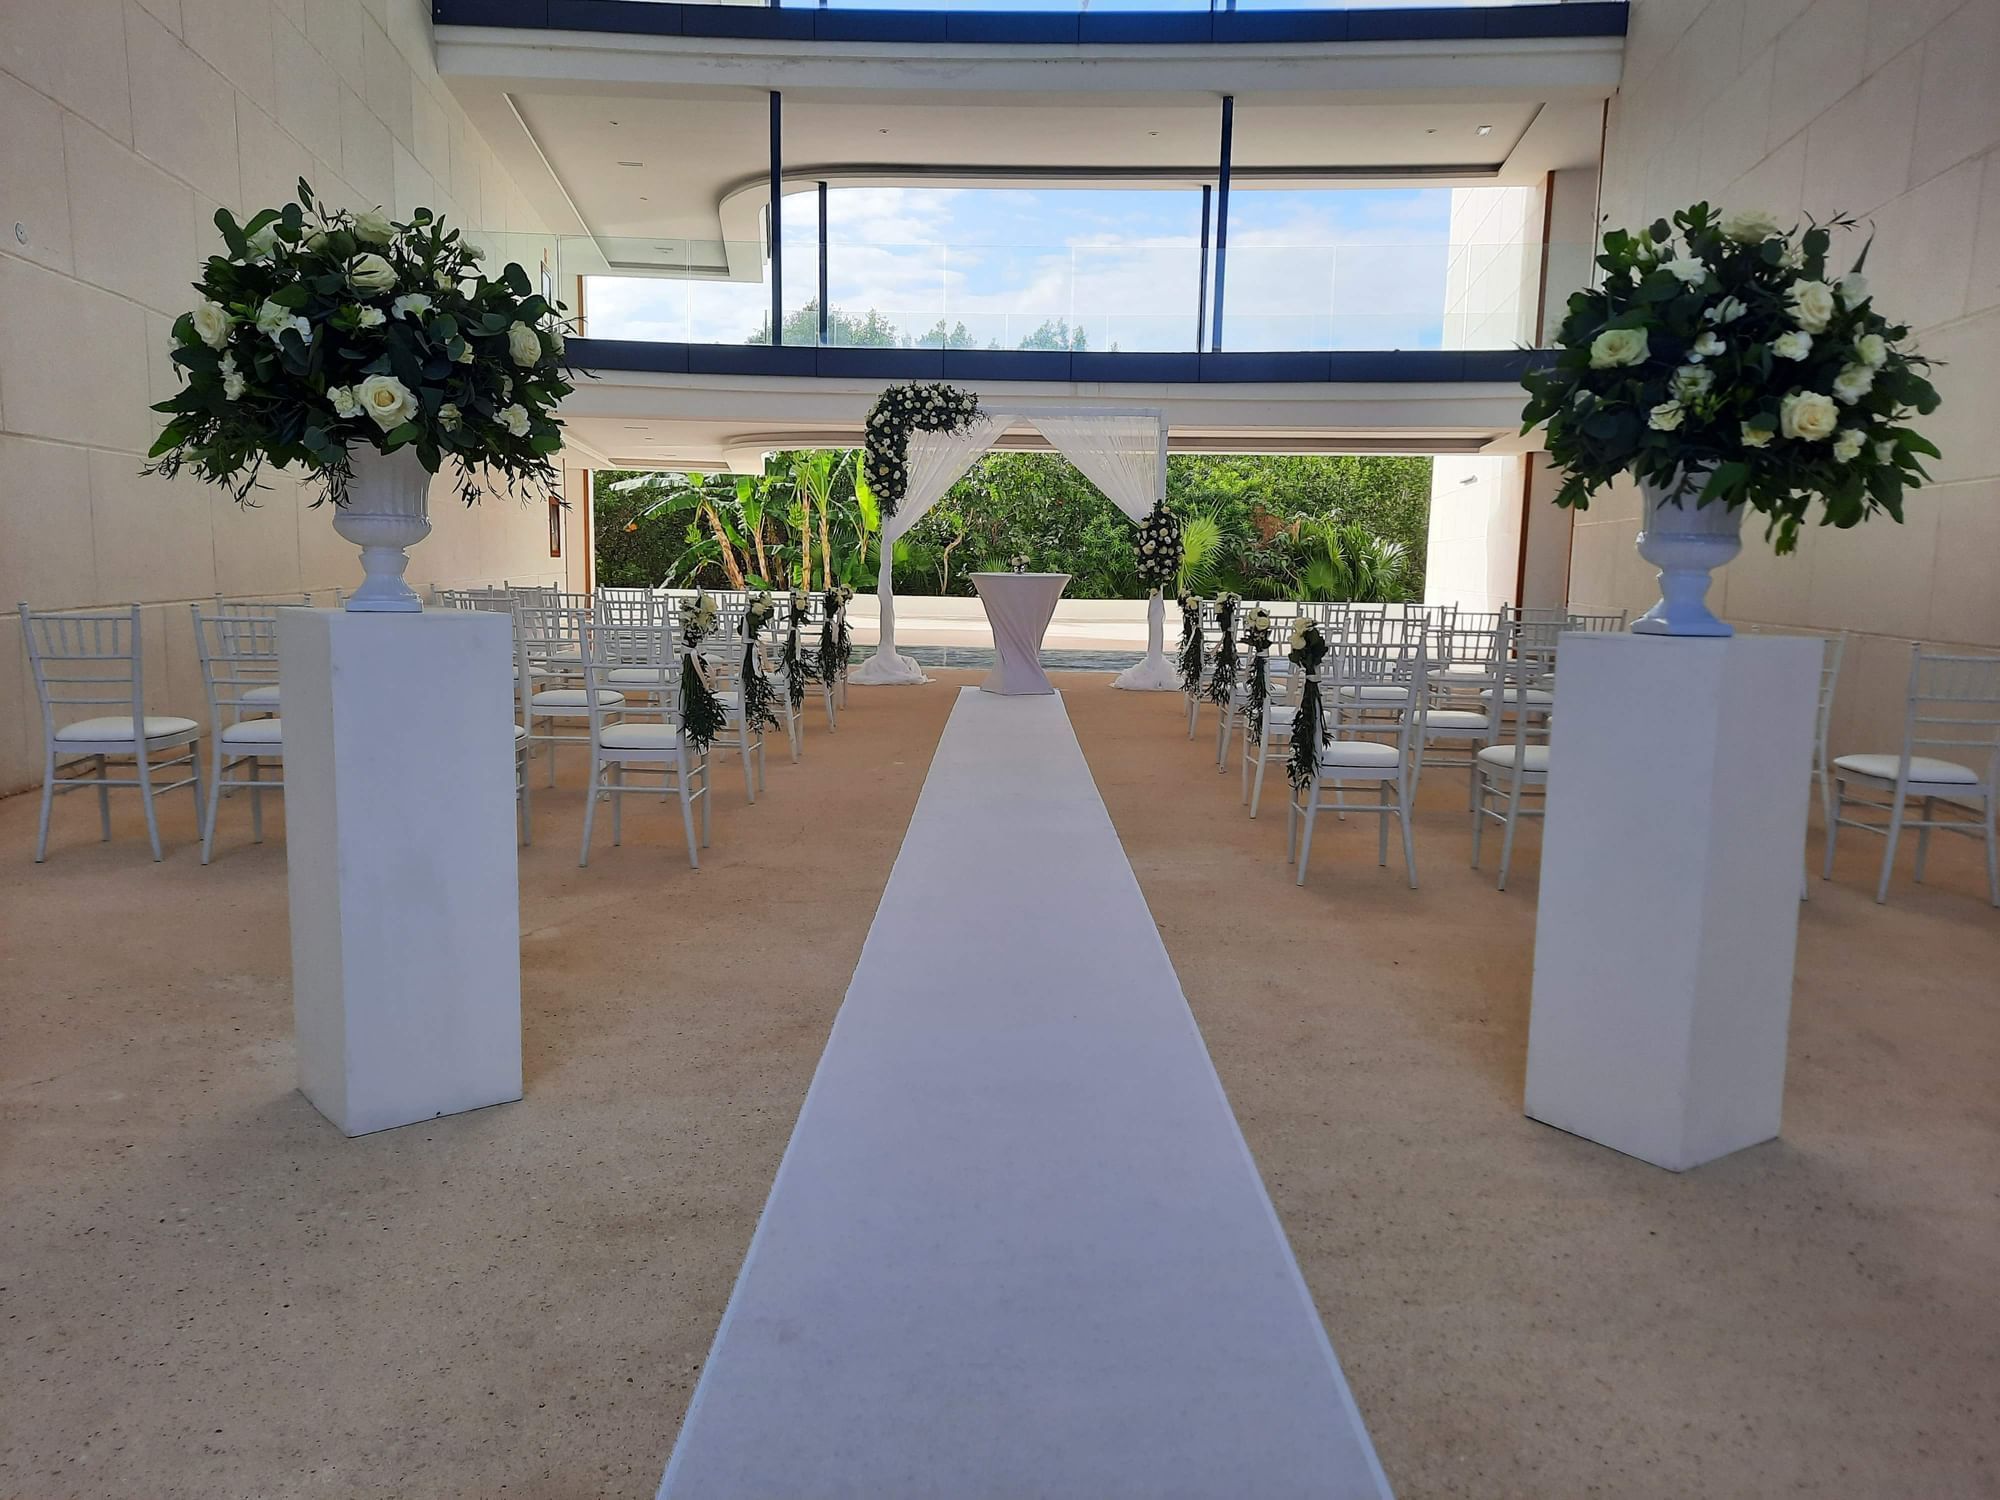 Indoor wedding reception, aisle runner & fresh flower decorations in The H at Haven Riviera Cancun